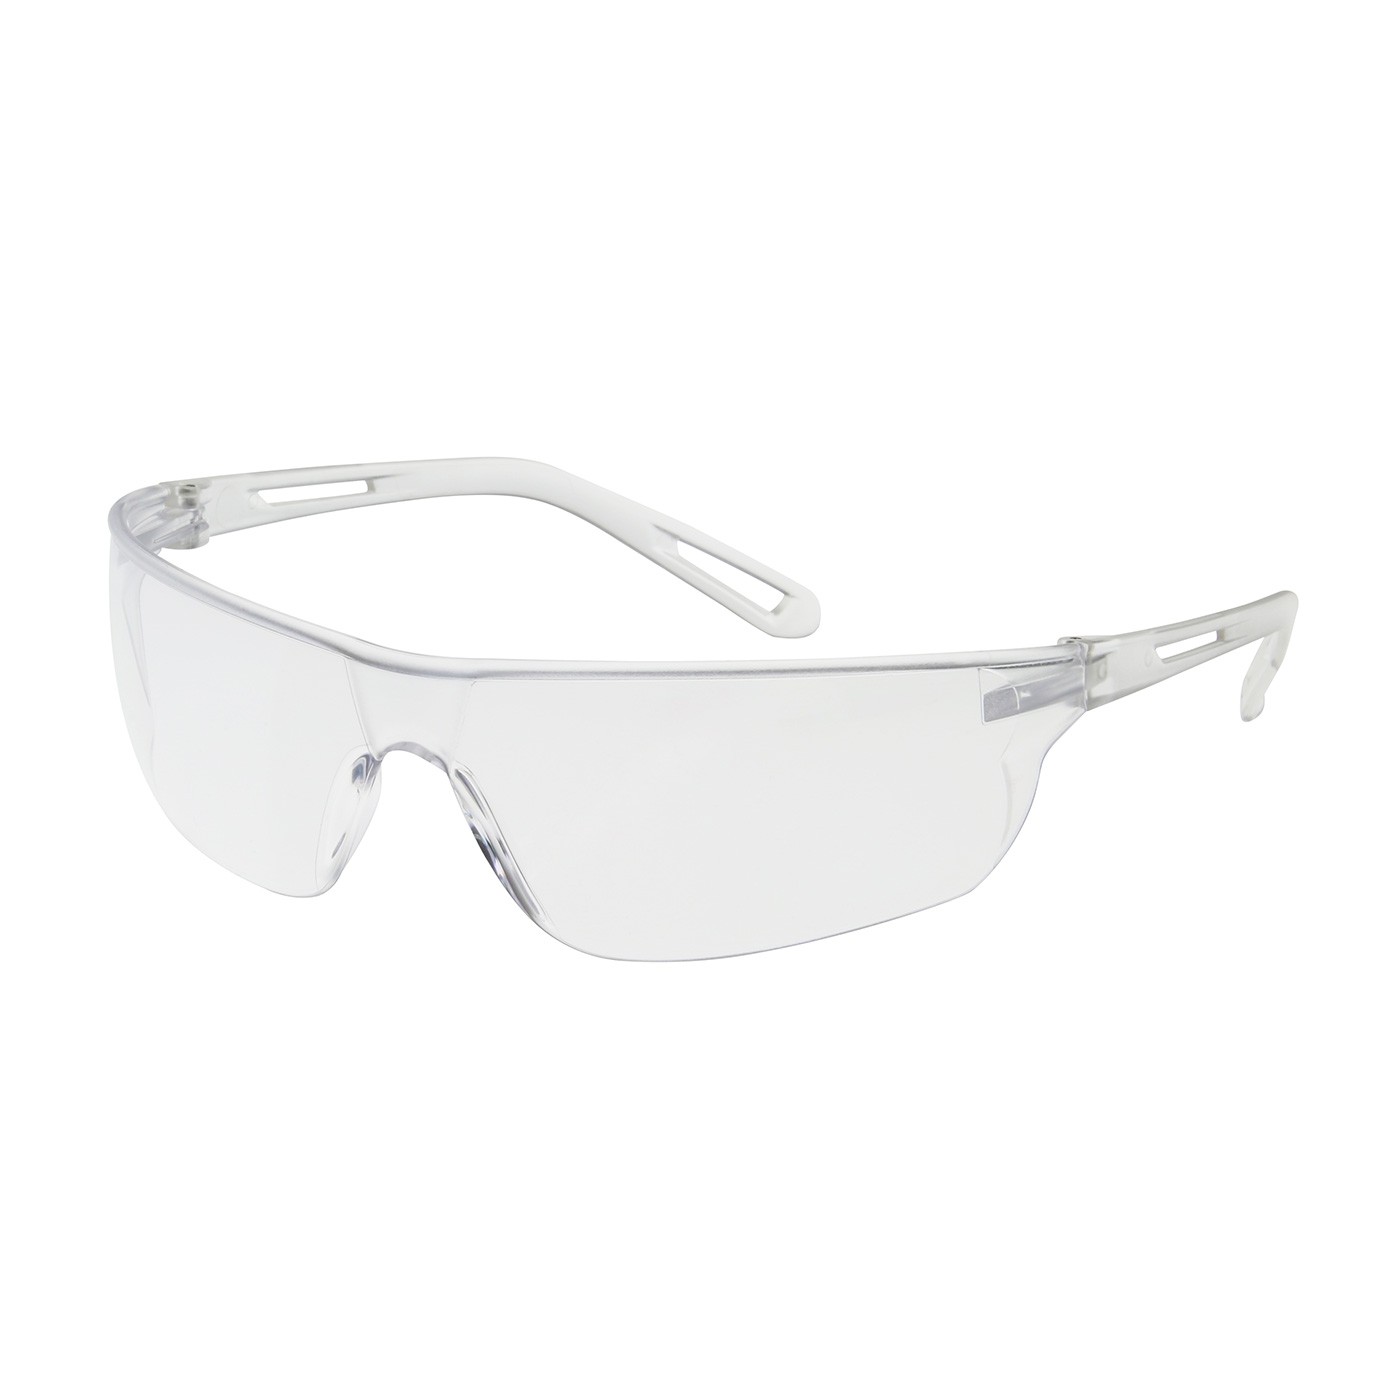 Zenon Z-Lyte™ Rimless Safety Glasses with Clear Temple, Clear Lens and Anti-Scratch / Anti-Fog Coating  (#250-09-0020)